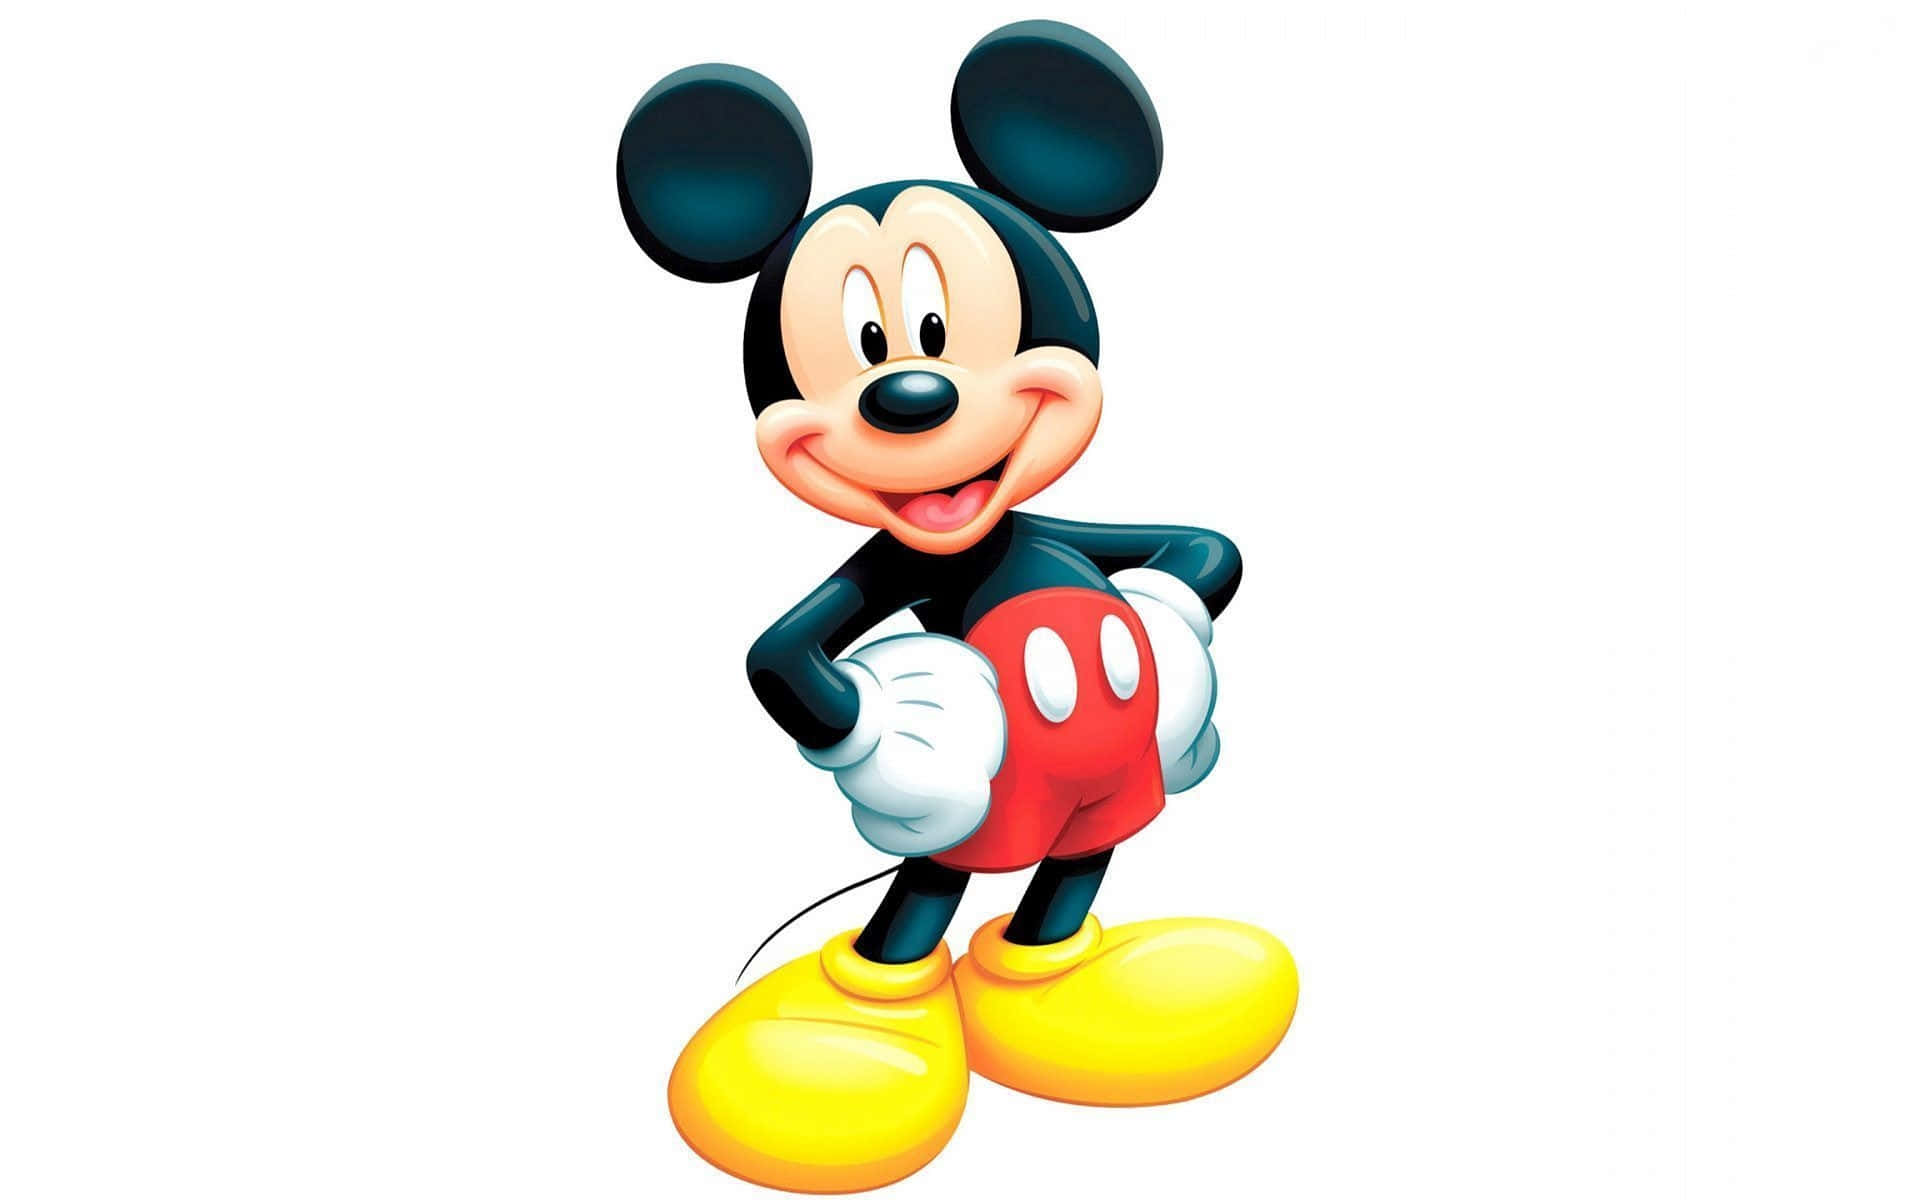 A picture of an adorable Mickey Mouse in a playful pose. Wallpaper